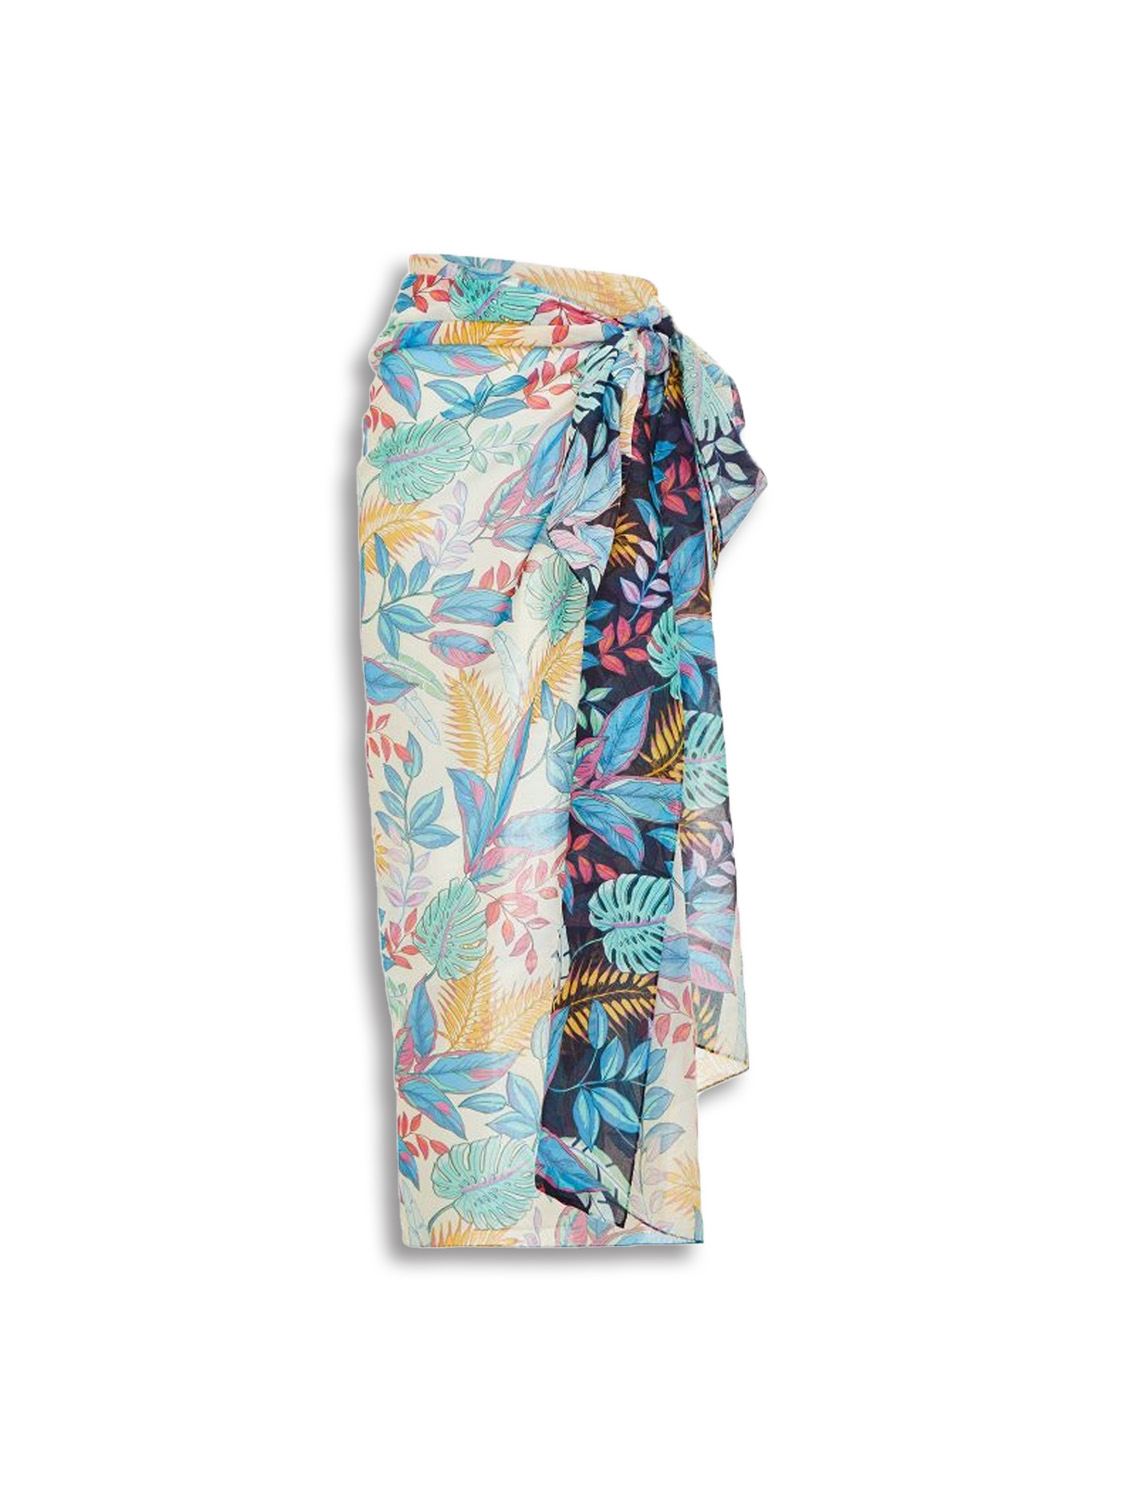 Printed Cotton Baptist - large scarf with colorful pattern print